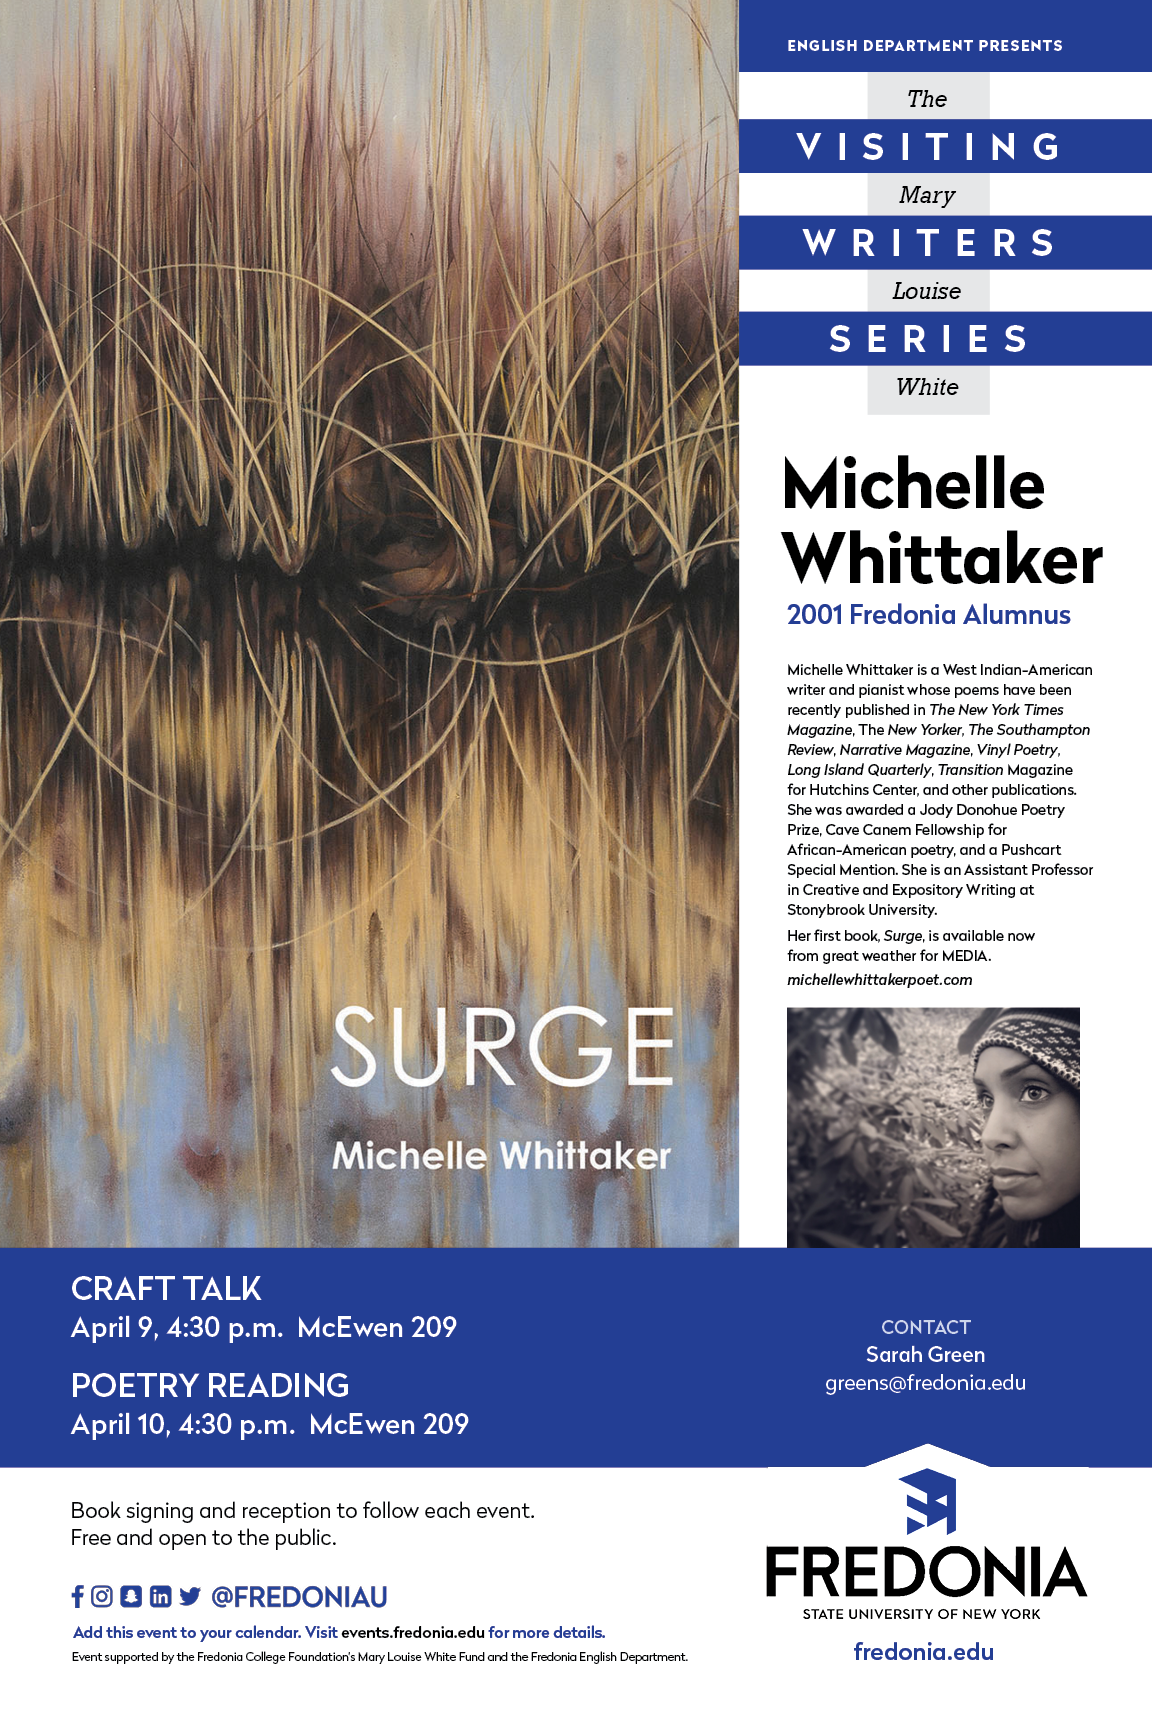 Michelle Whittaker, MLW Visiting Writers Series, April 9-10, 2019